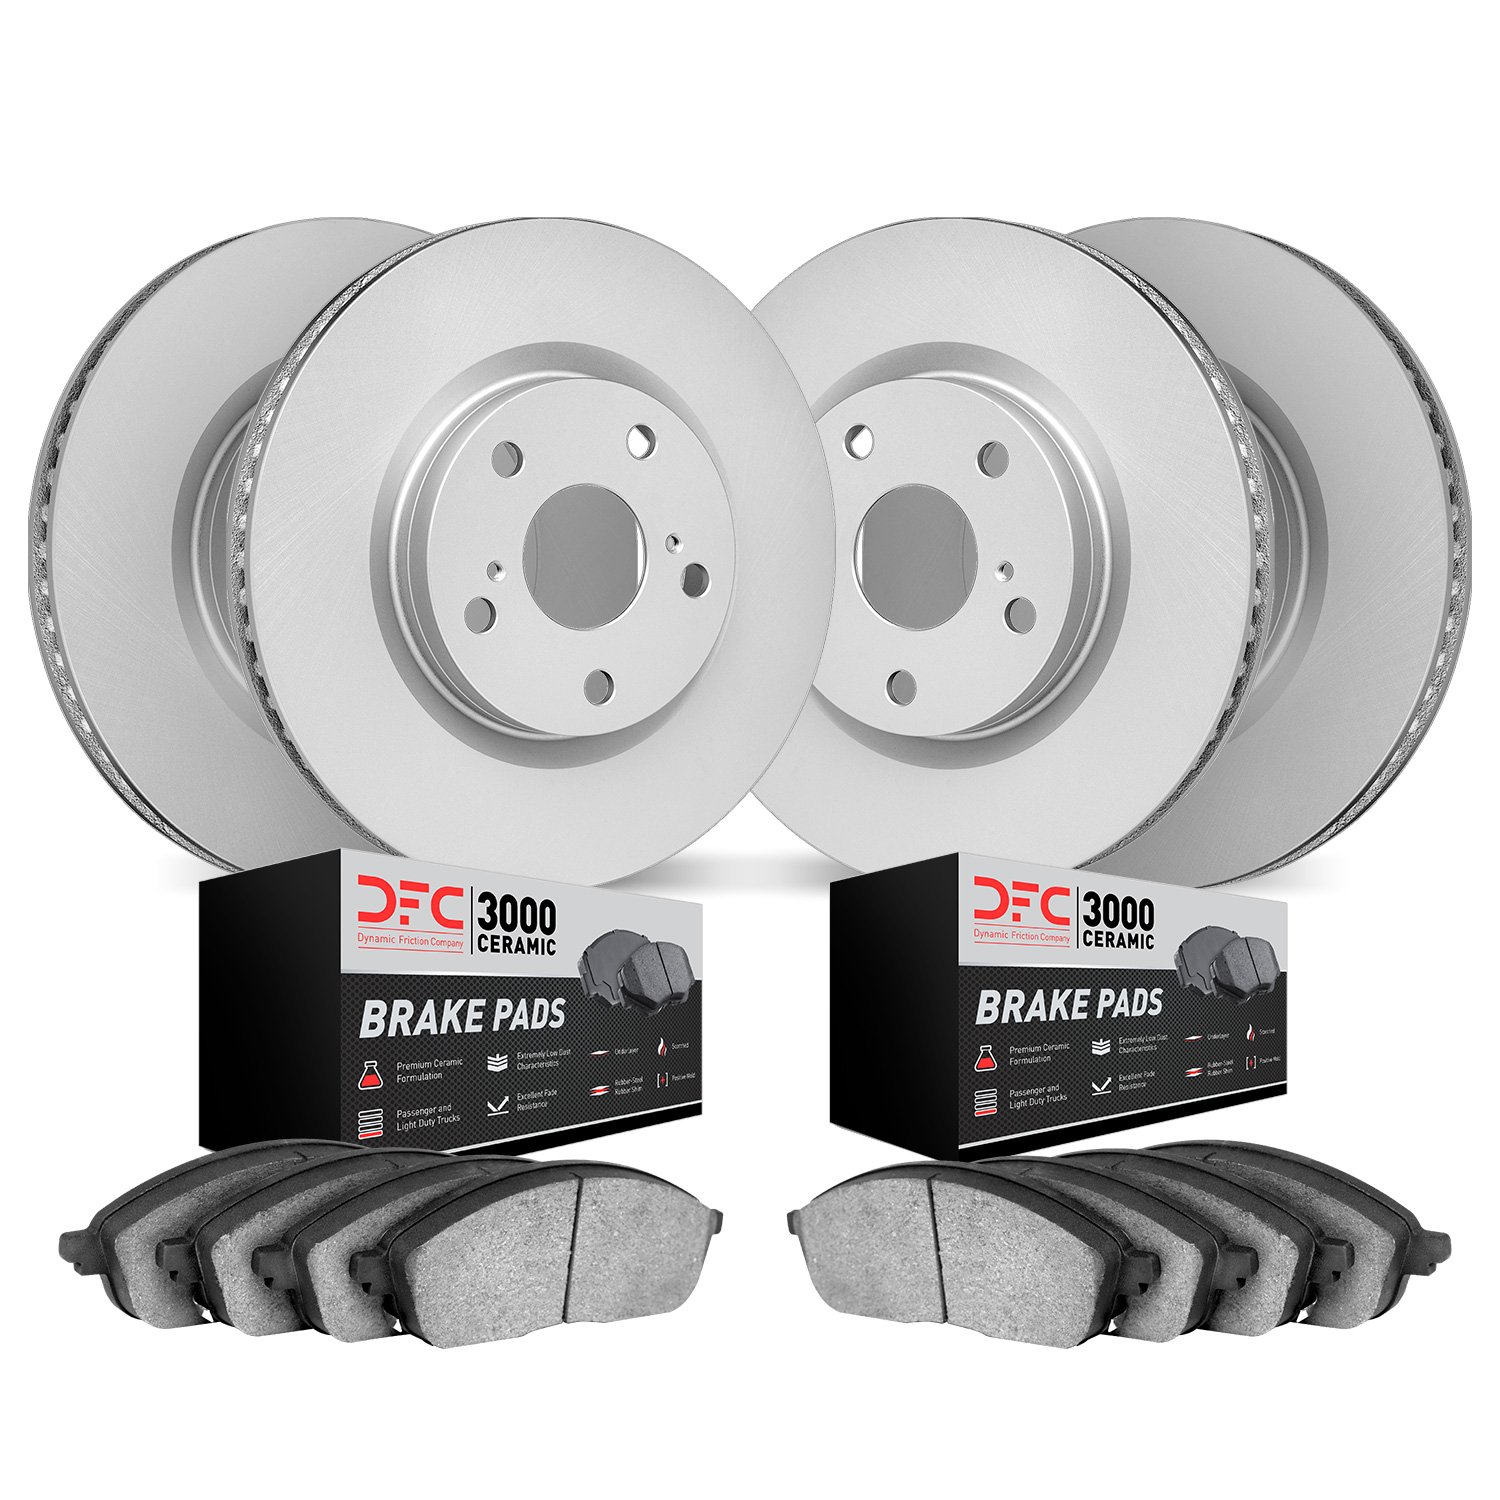 4304-39014 Geospec Brake Rotors with 3000-Series Ceramic Brake Pads Kit, Fits Select Mopar, Position: Front and Rear